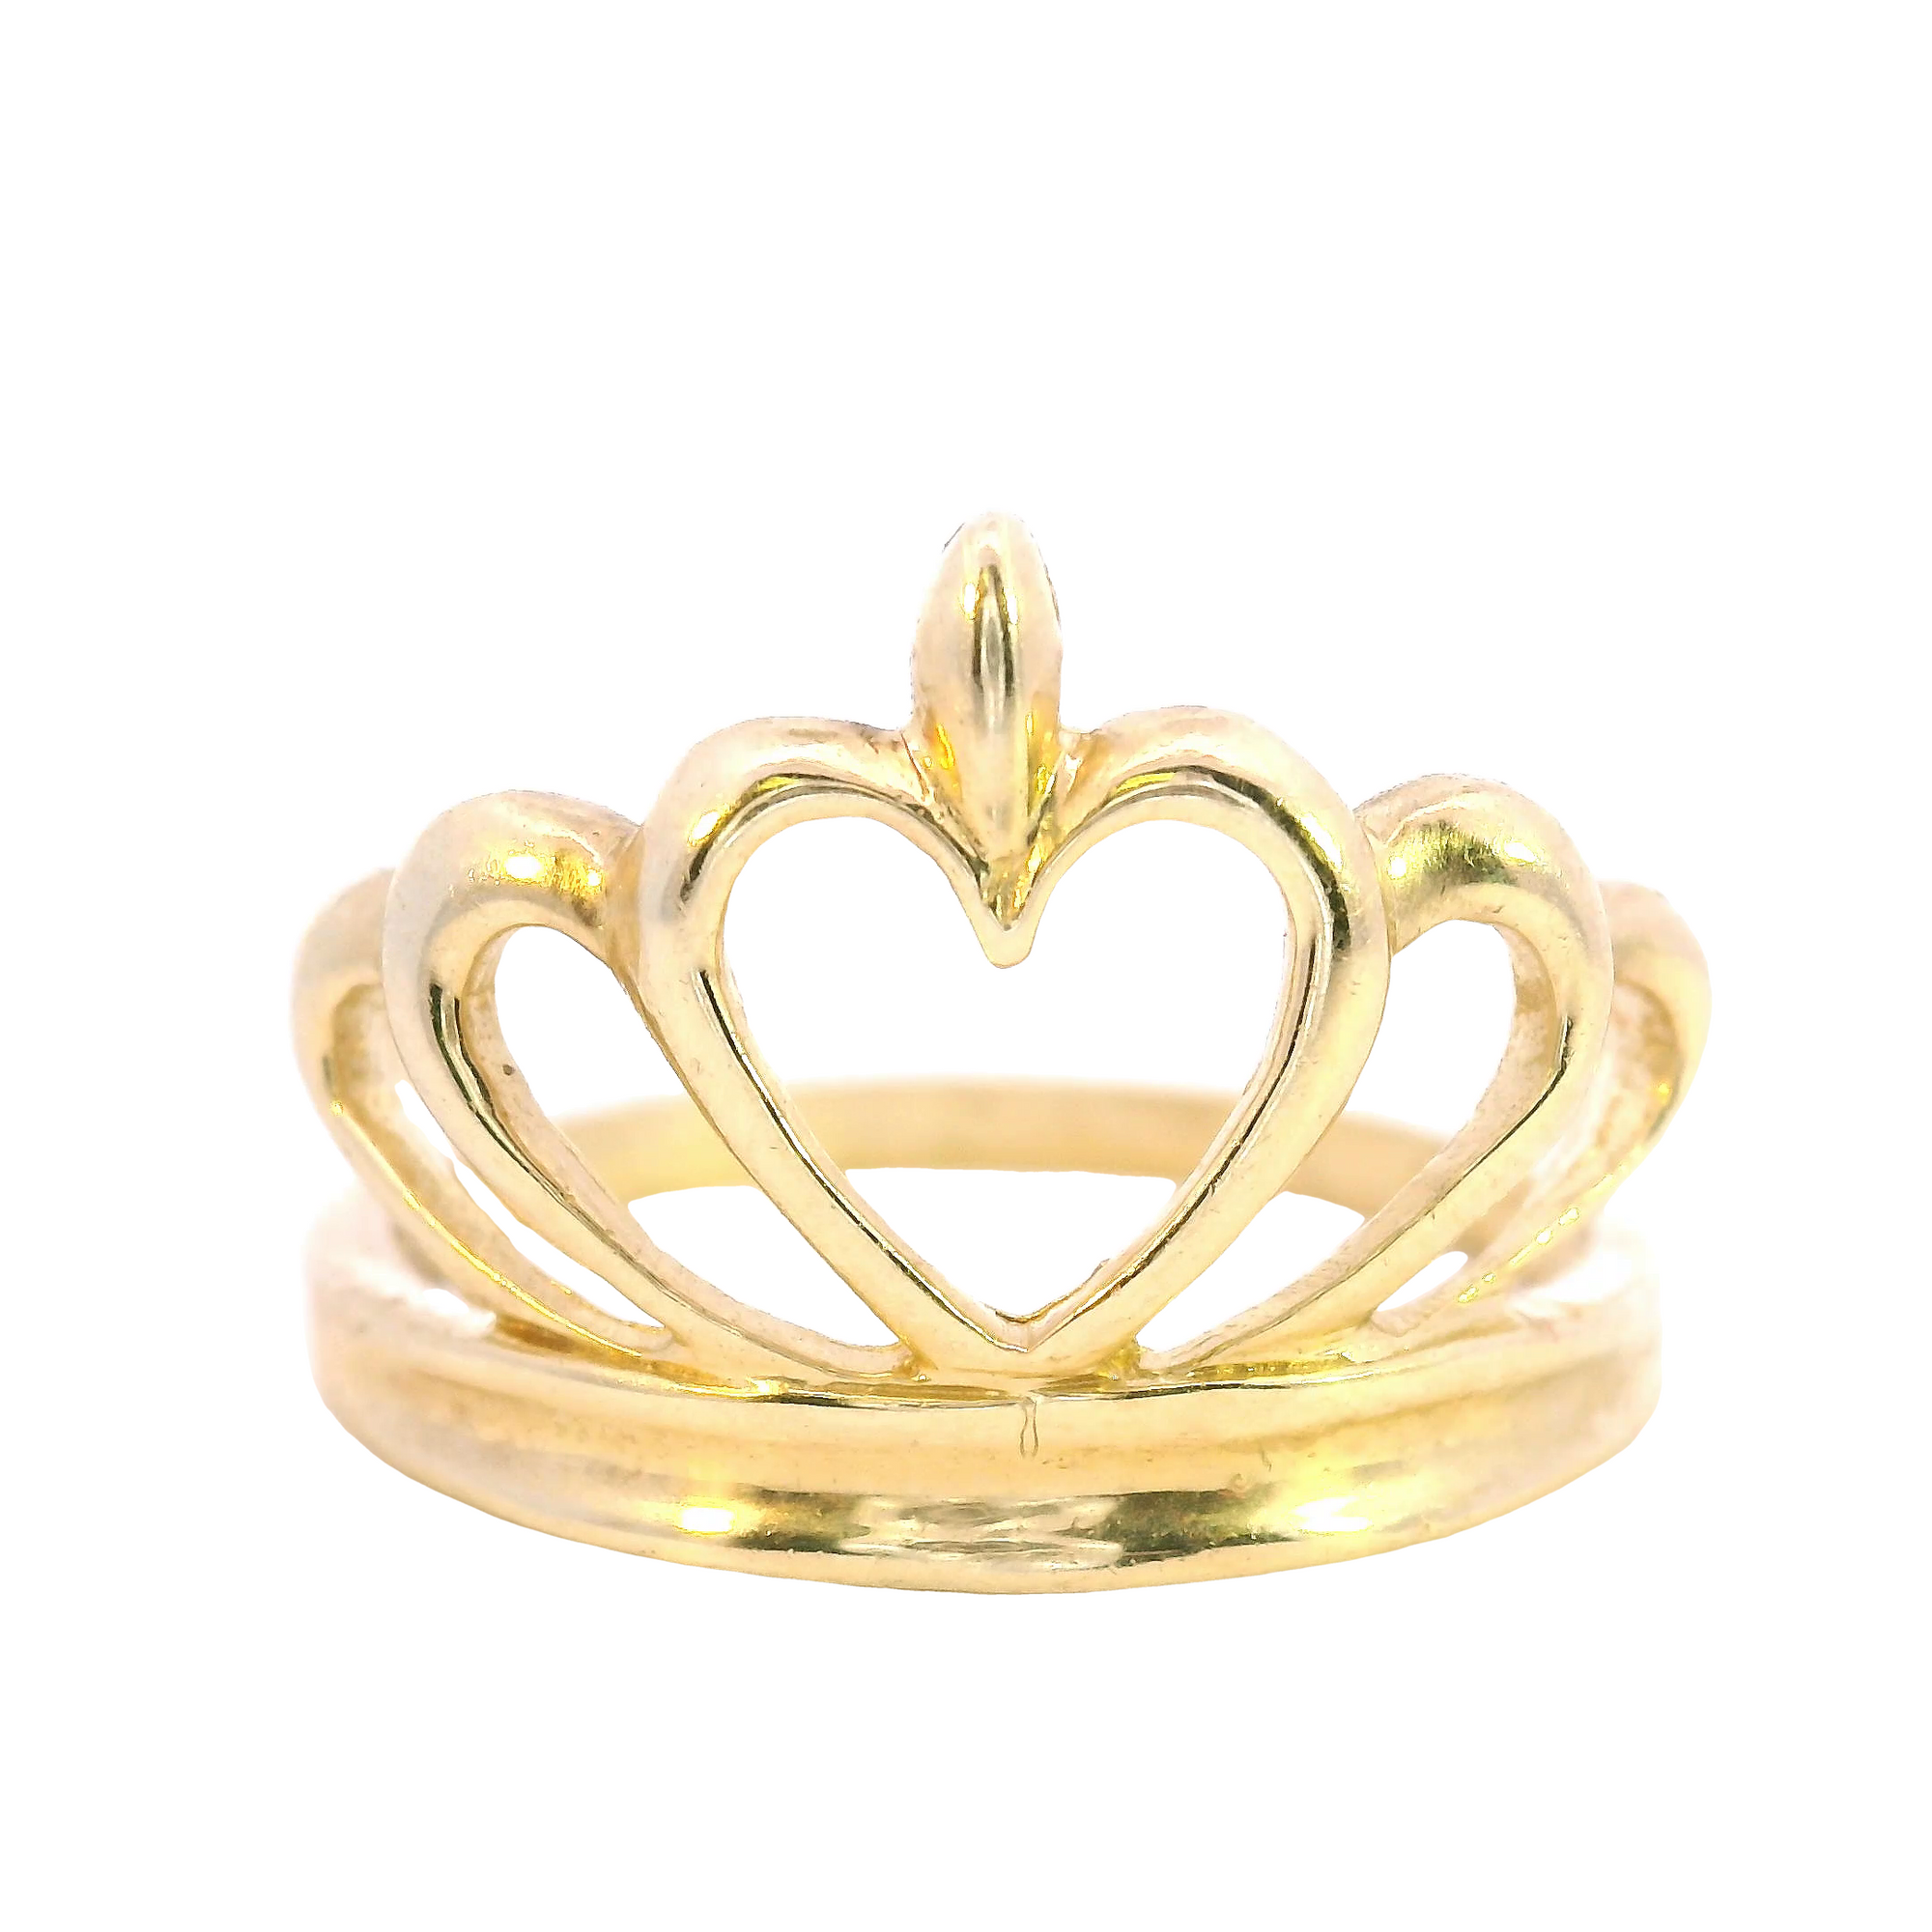 10K Real Gold Crown Ring for Women's